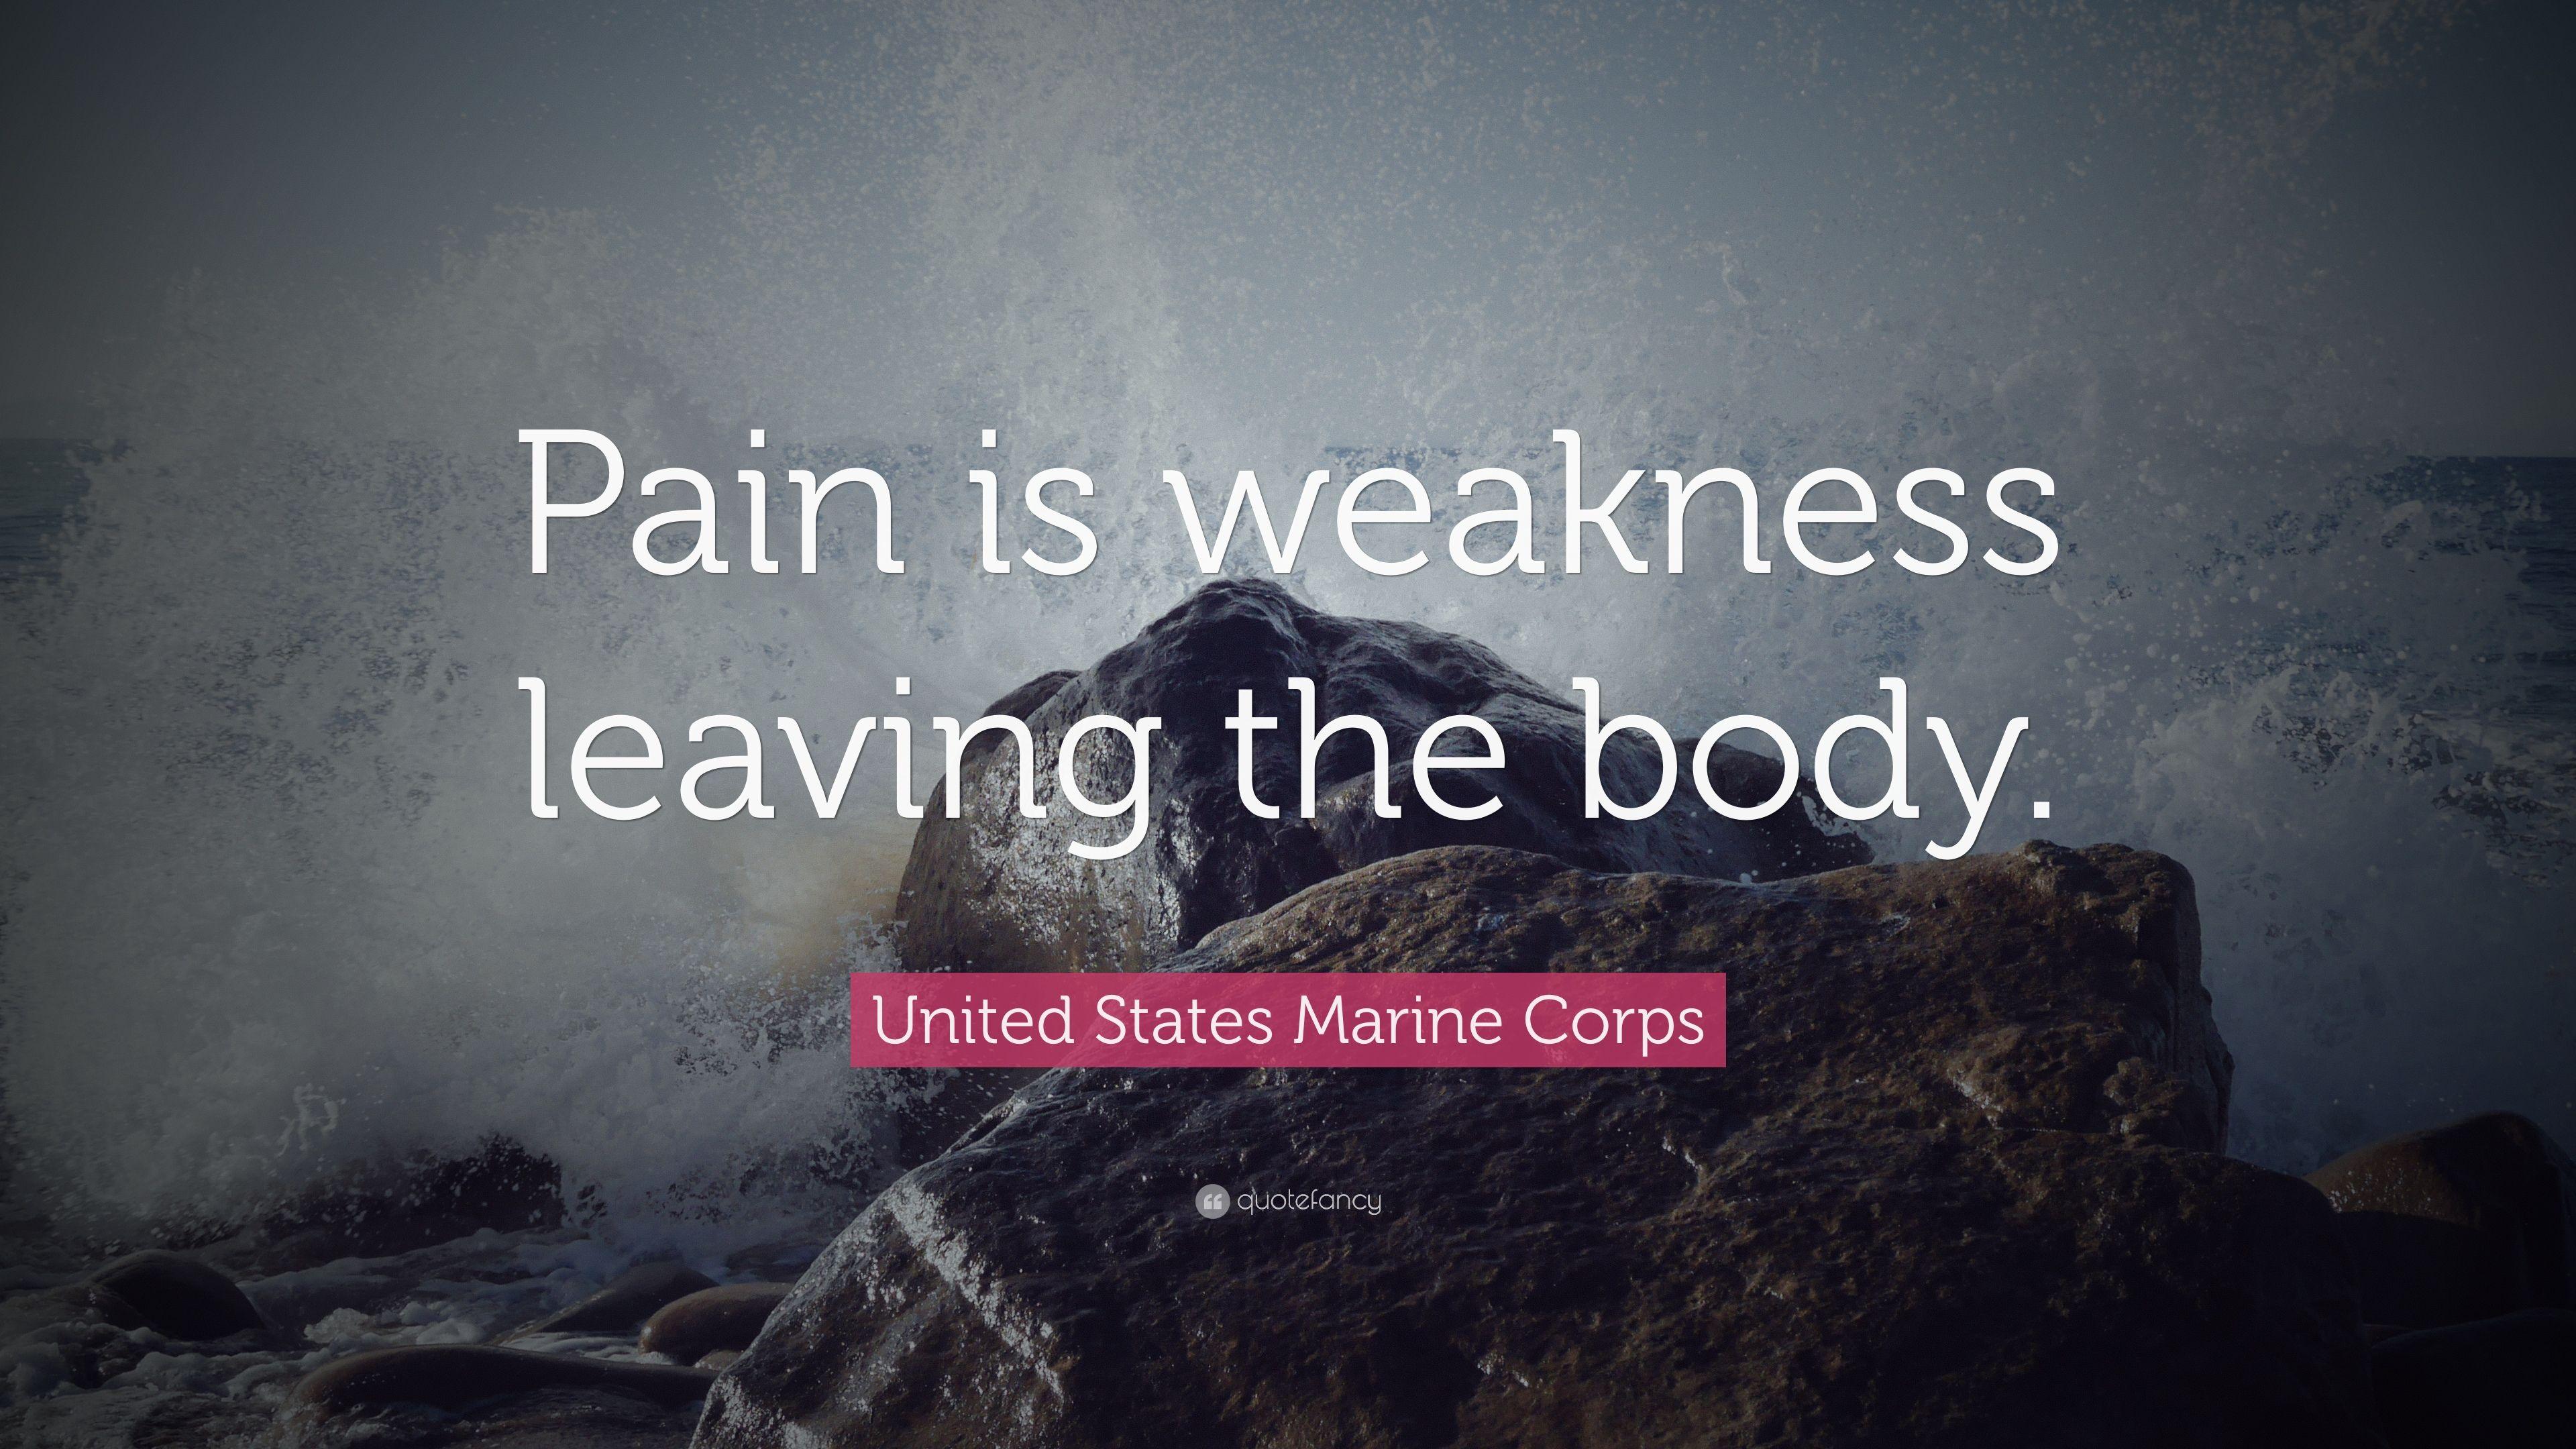 United States Marine Corps Quote: “Pain is weakness leaving the